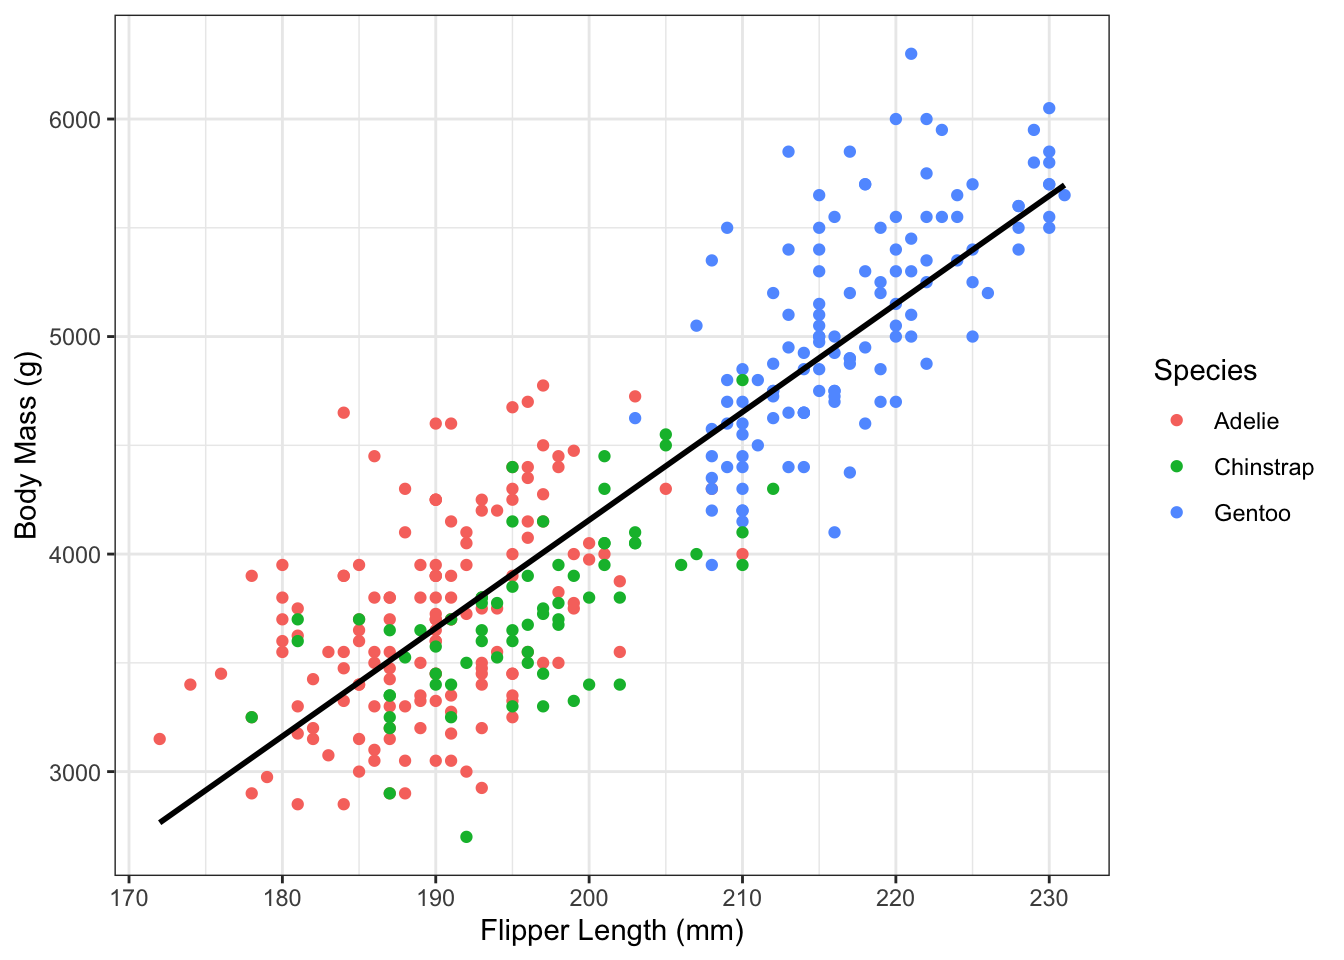 Flipper length and body mass in the Palmer Penguin dataset, with best fitting line.